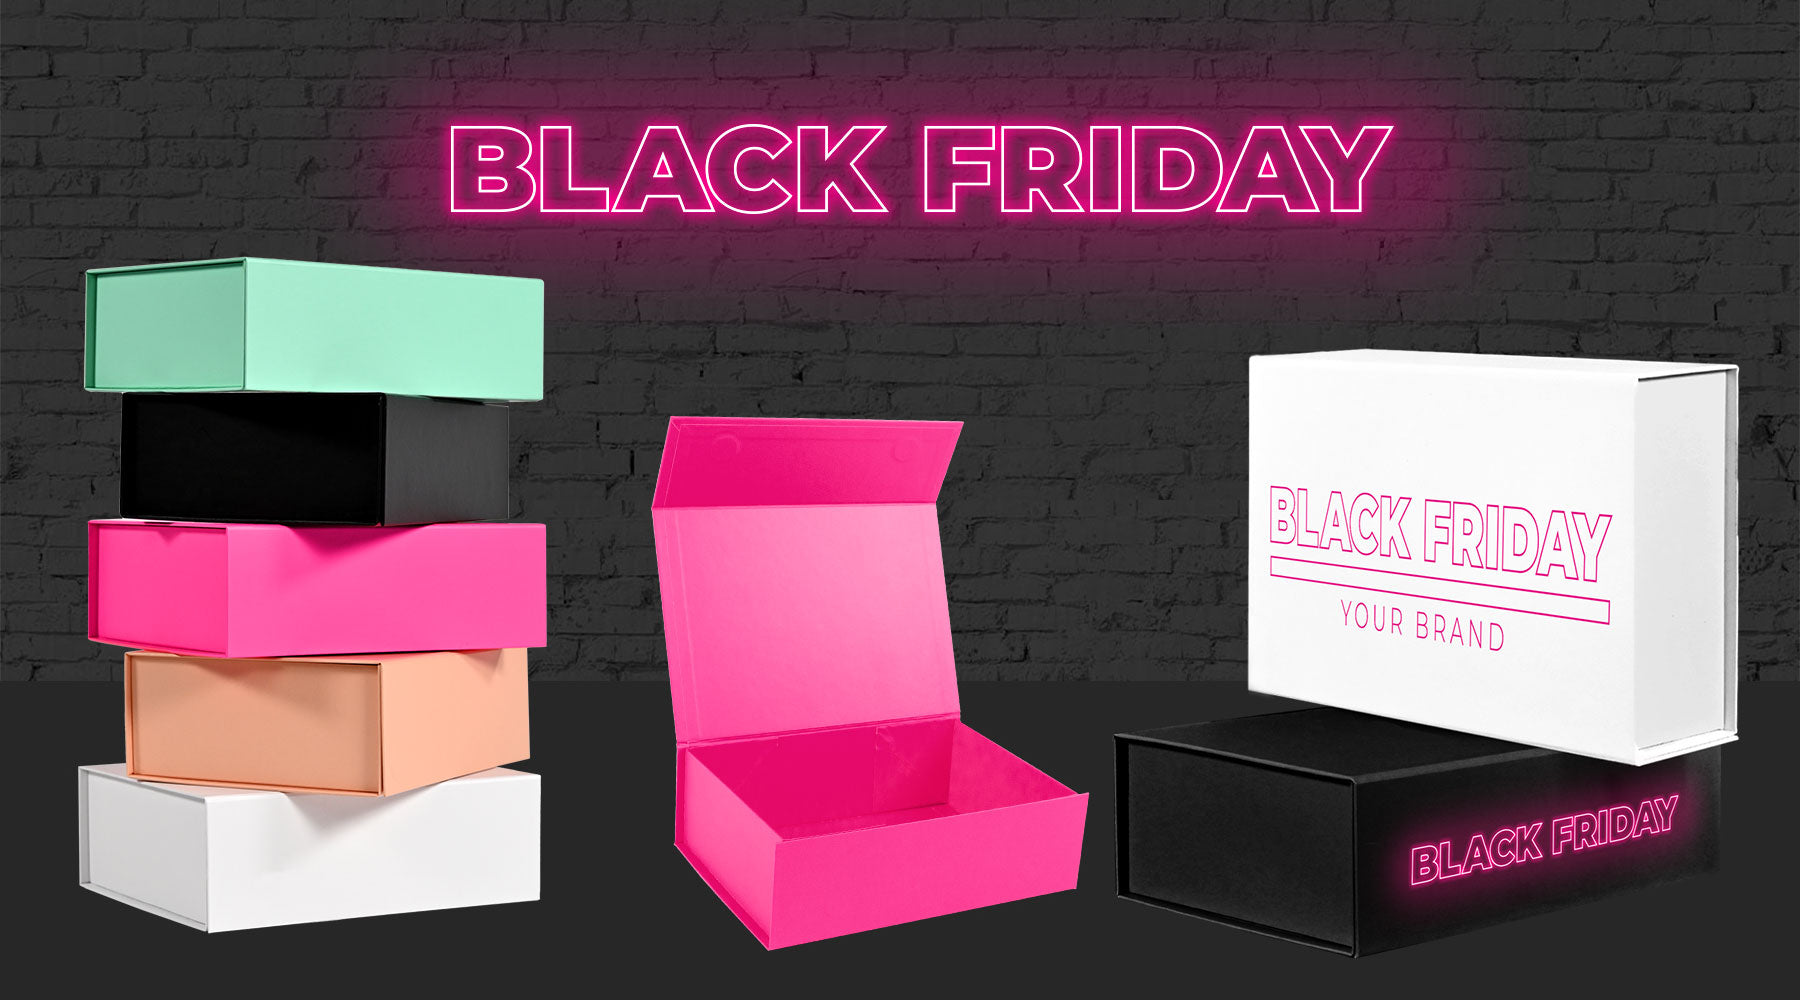 Our packaging Boxes for Black Friday!